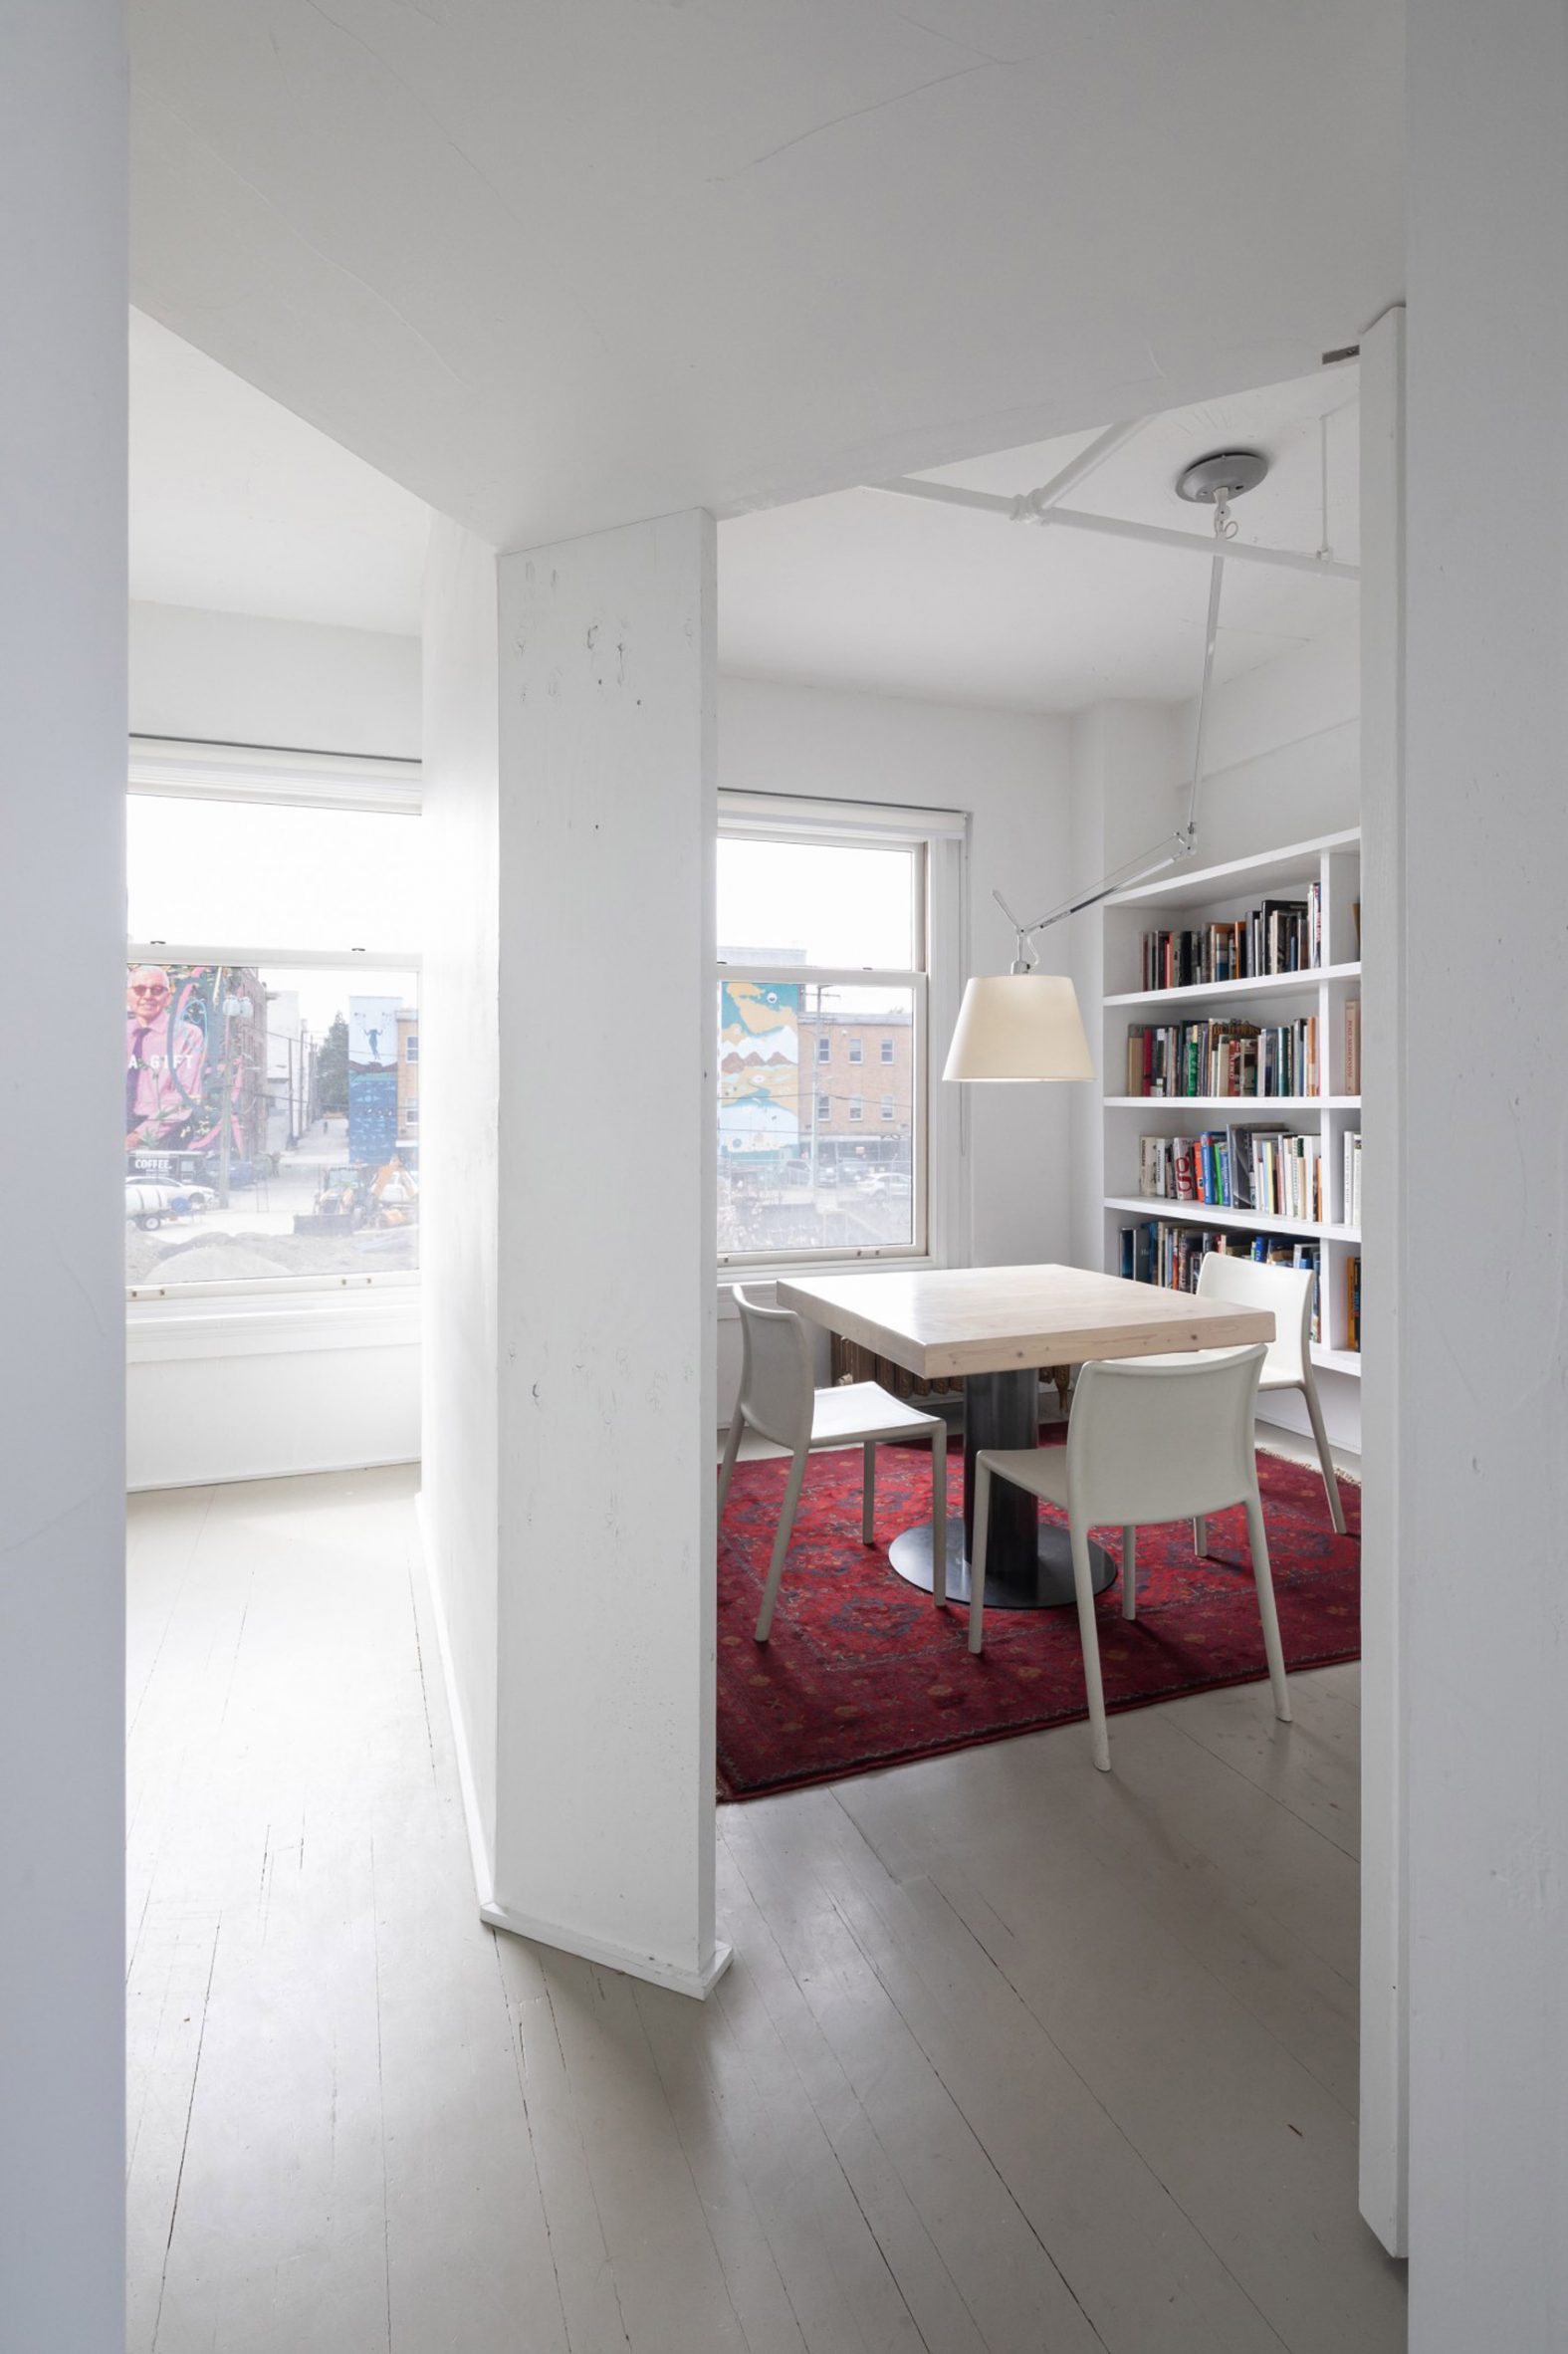 Small meeting room with white-painted wooden floors and white shelving in D'Arcy Jones Architects' self-designed studio